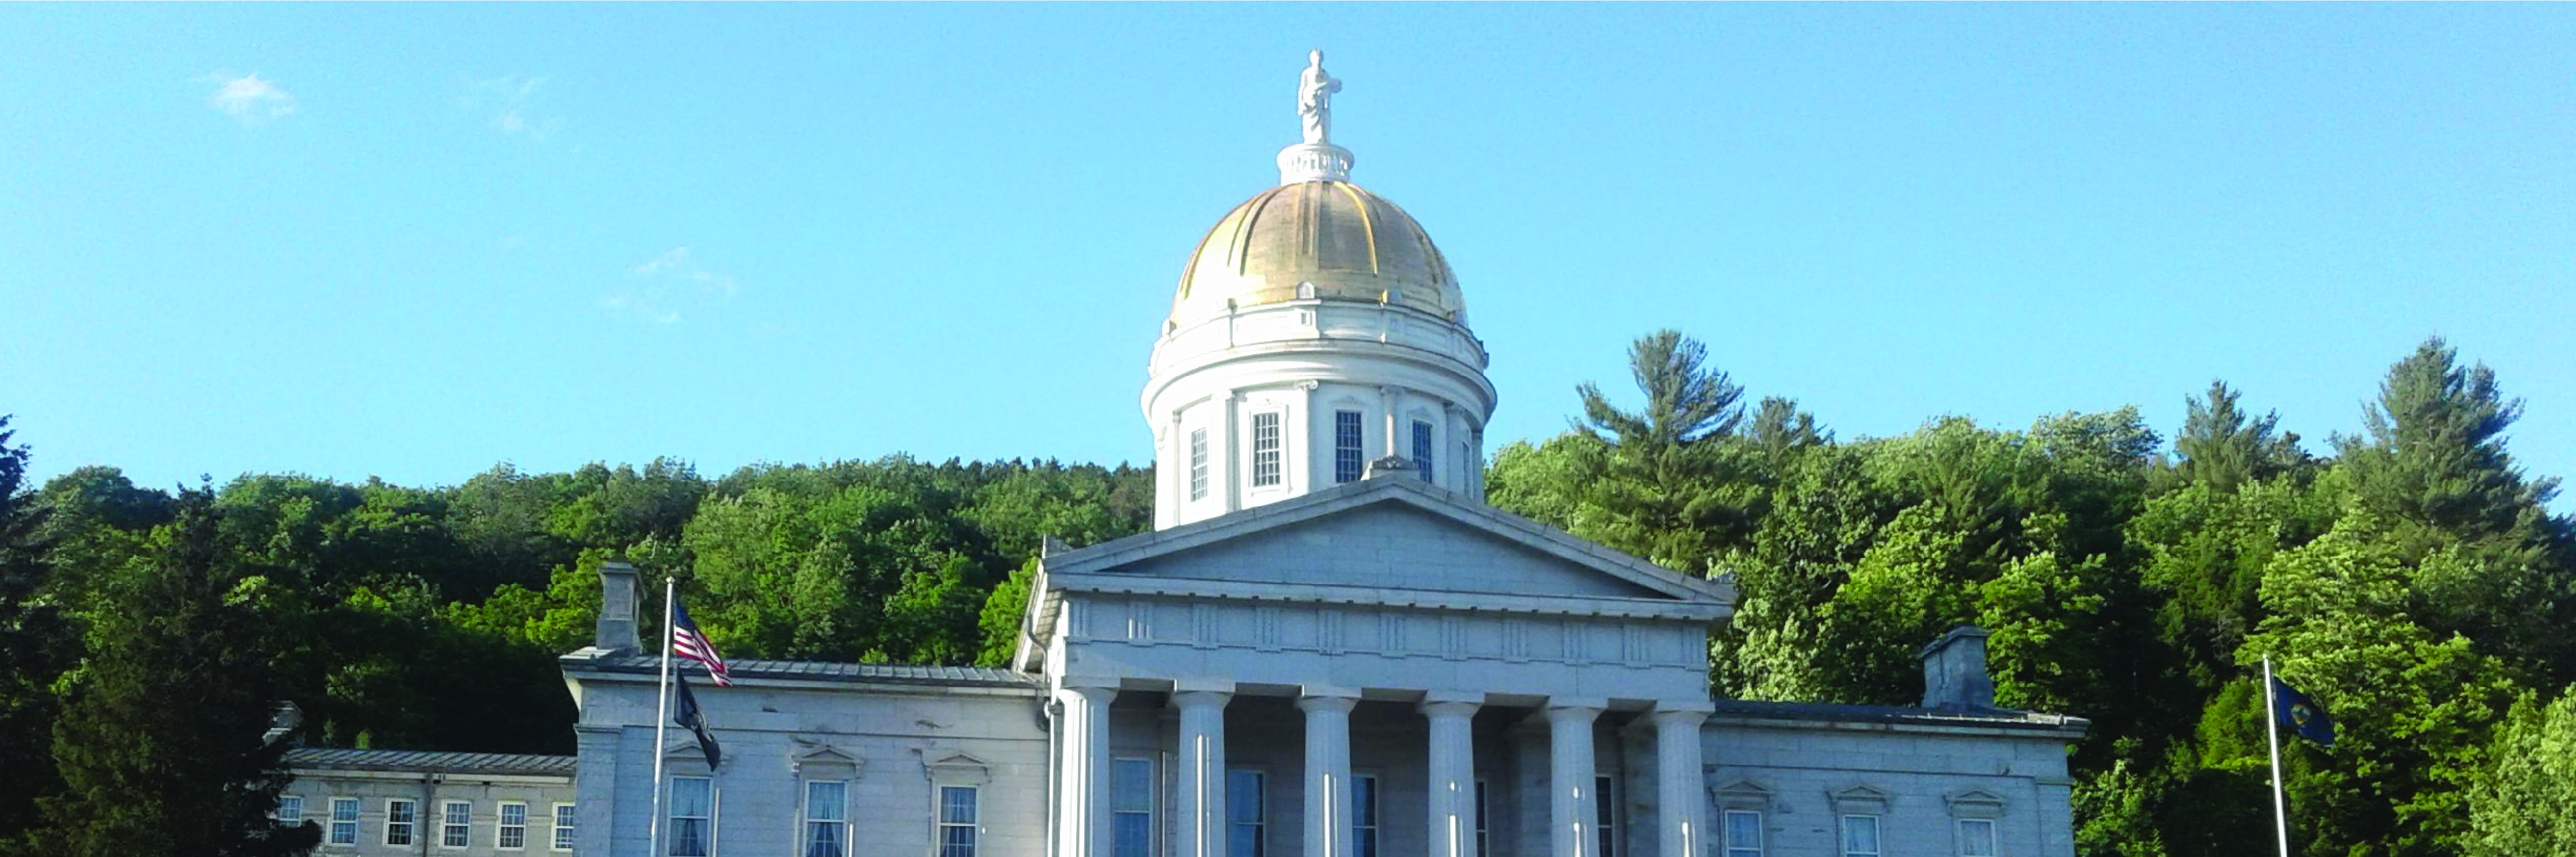 Image of Vermont State House